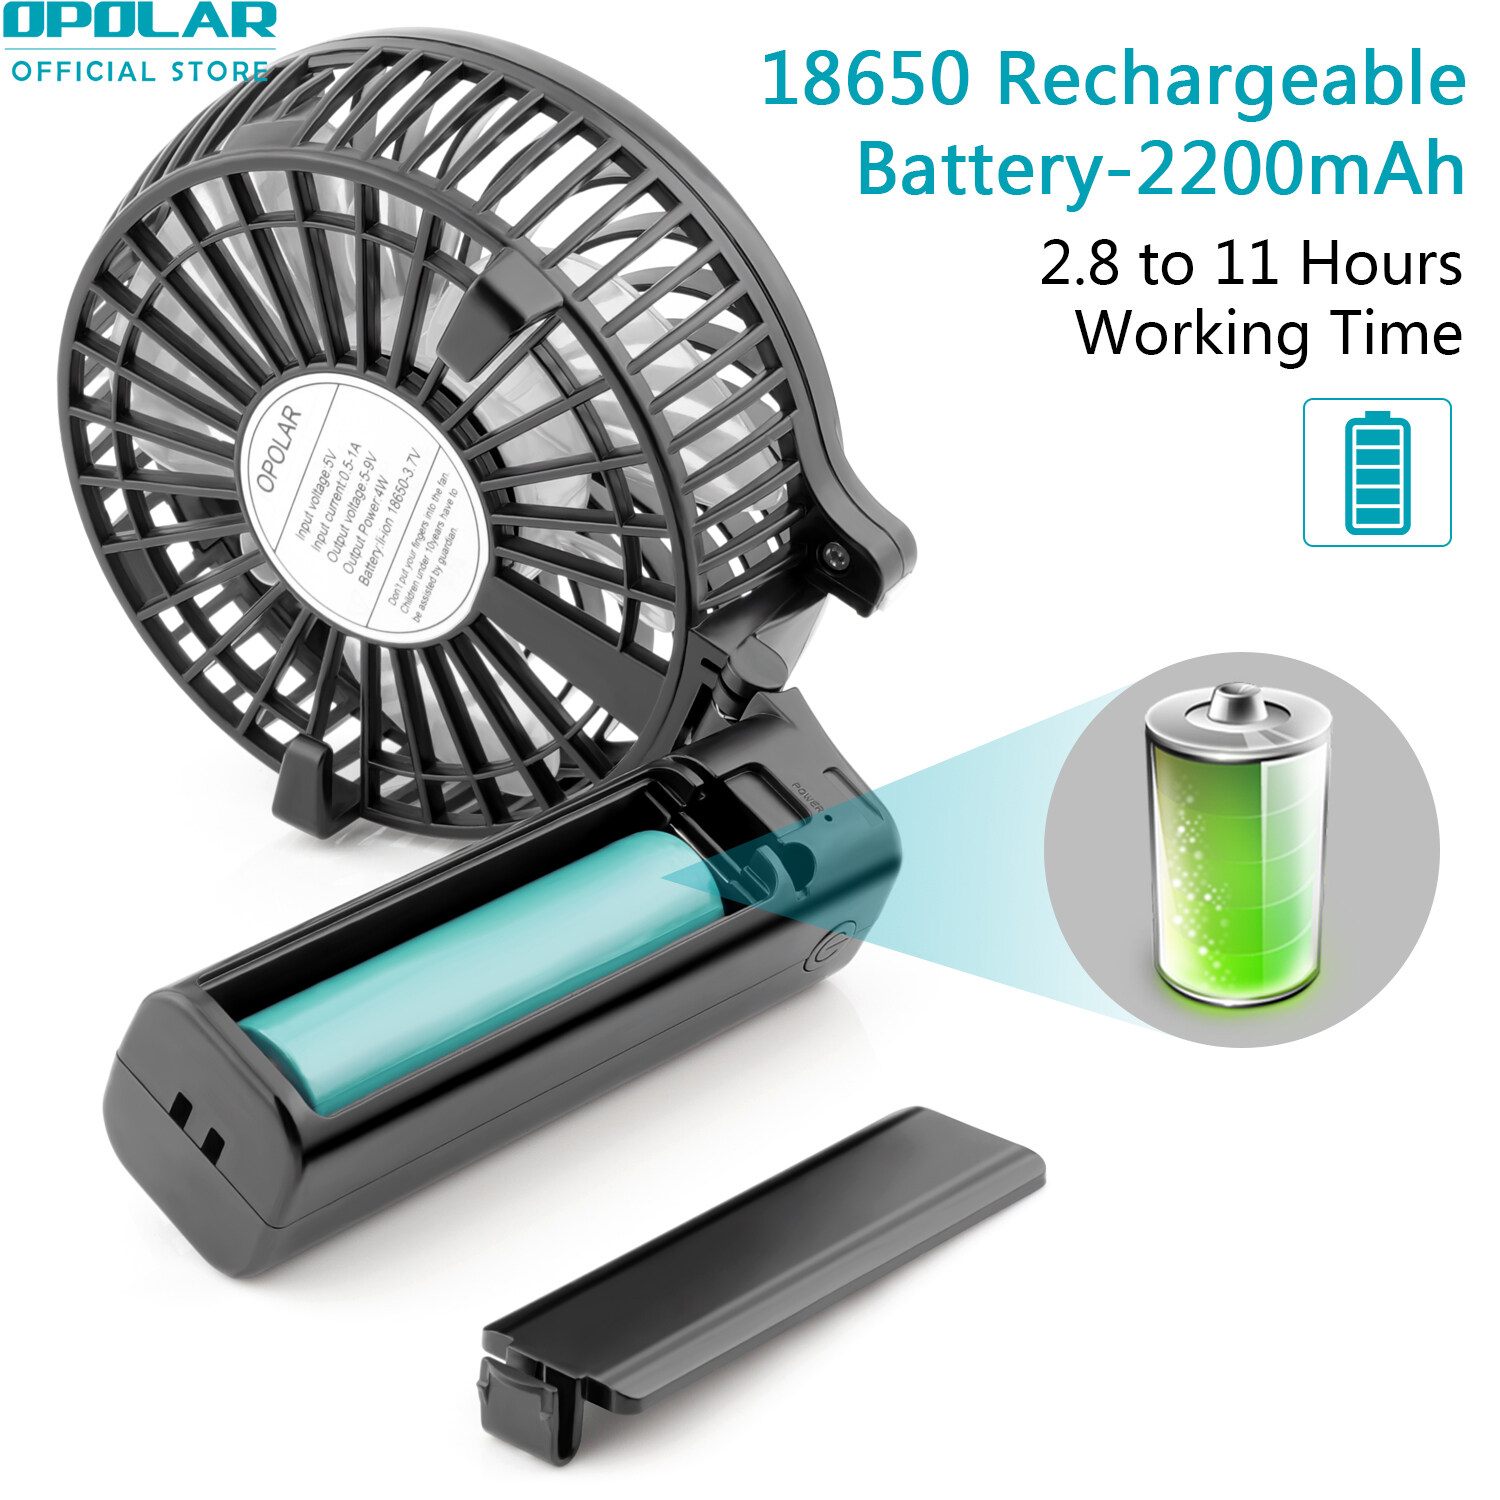 Mini Handheld Fan 180° Rotation Foldable Personal Desk Fan for Home Office Travel USB Rechargeable Hand Fan with Battery Operated 